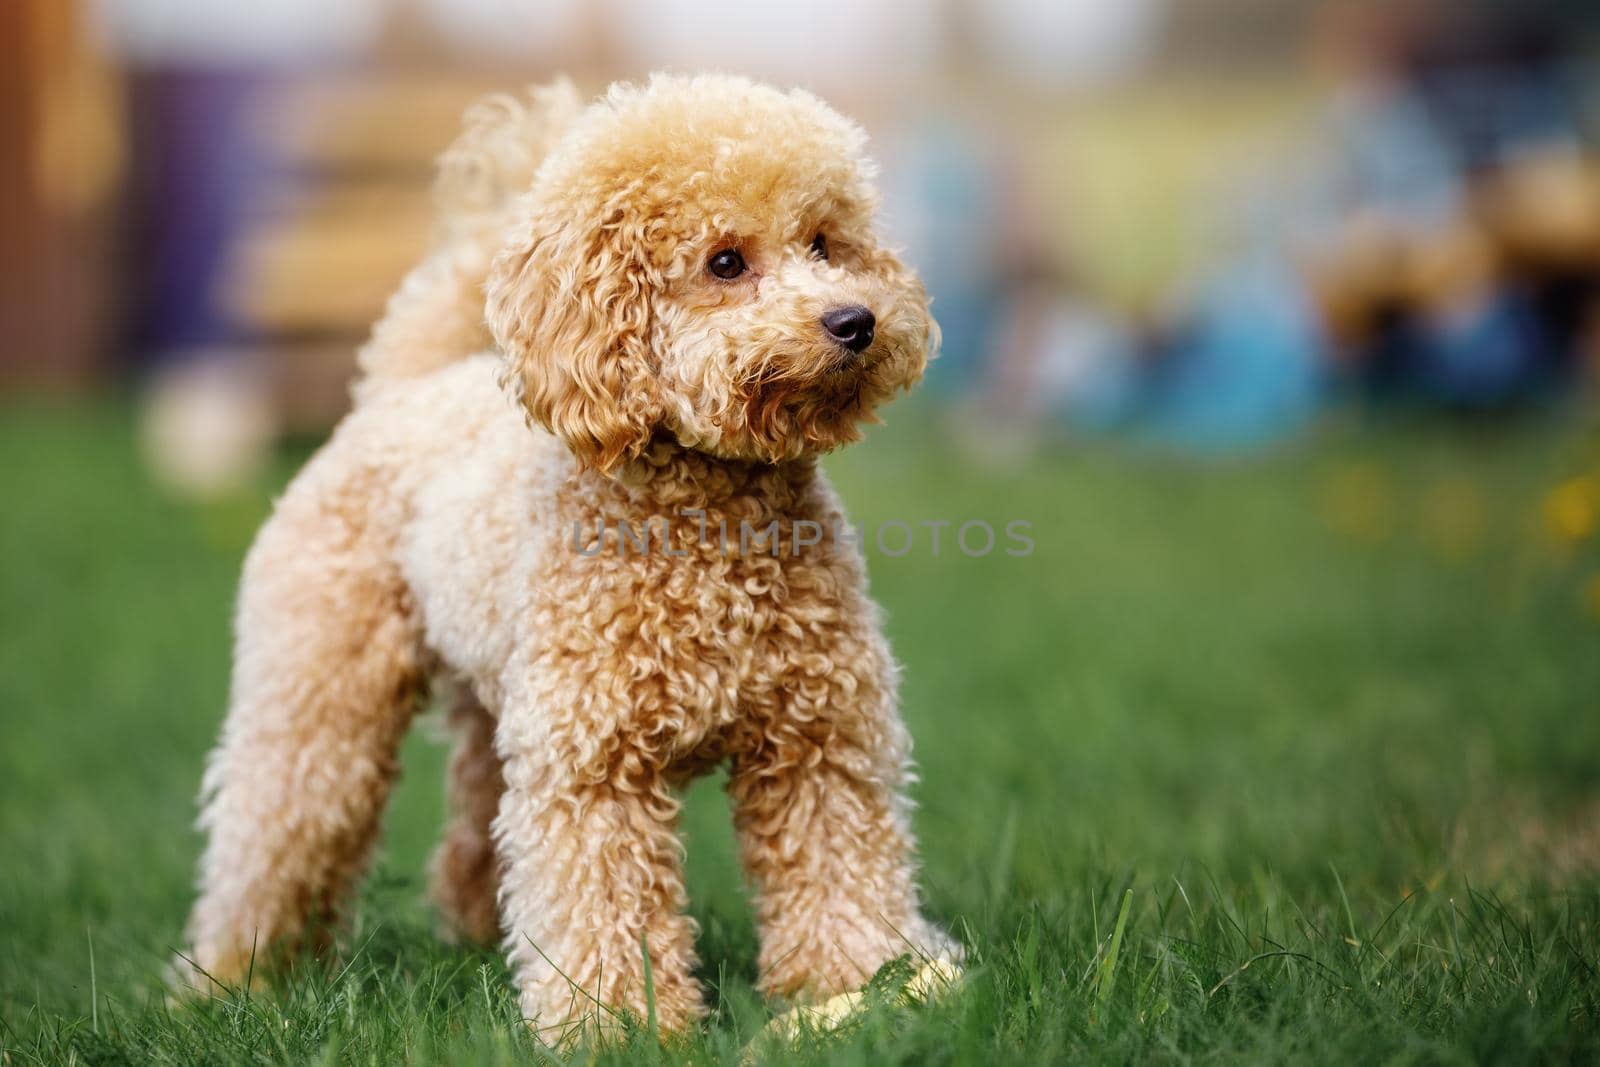 Cute little poodle puppy in the yard. by Lincikas